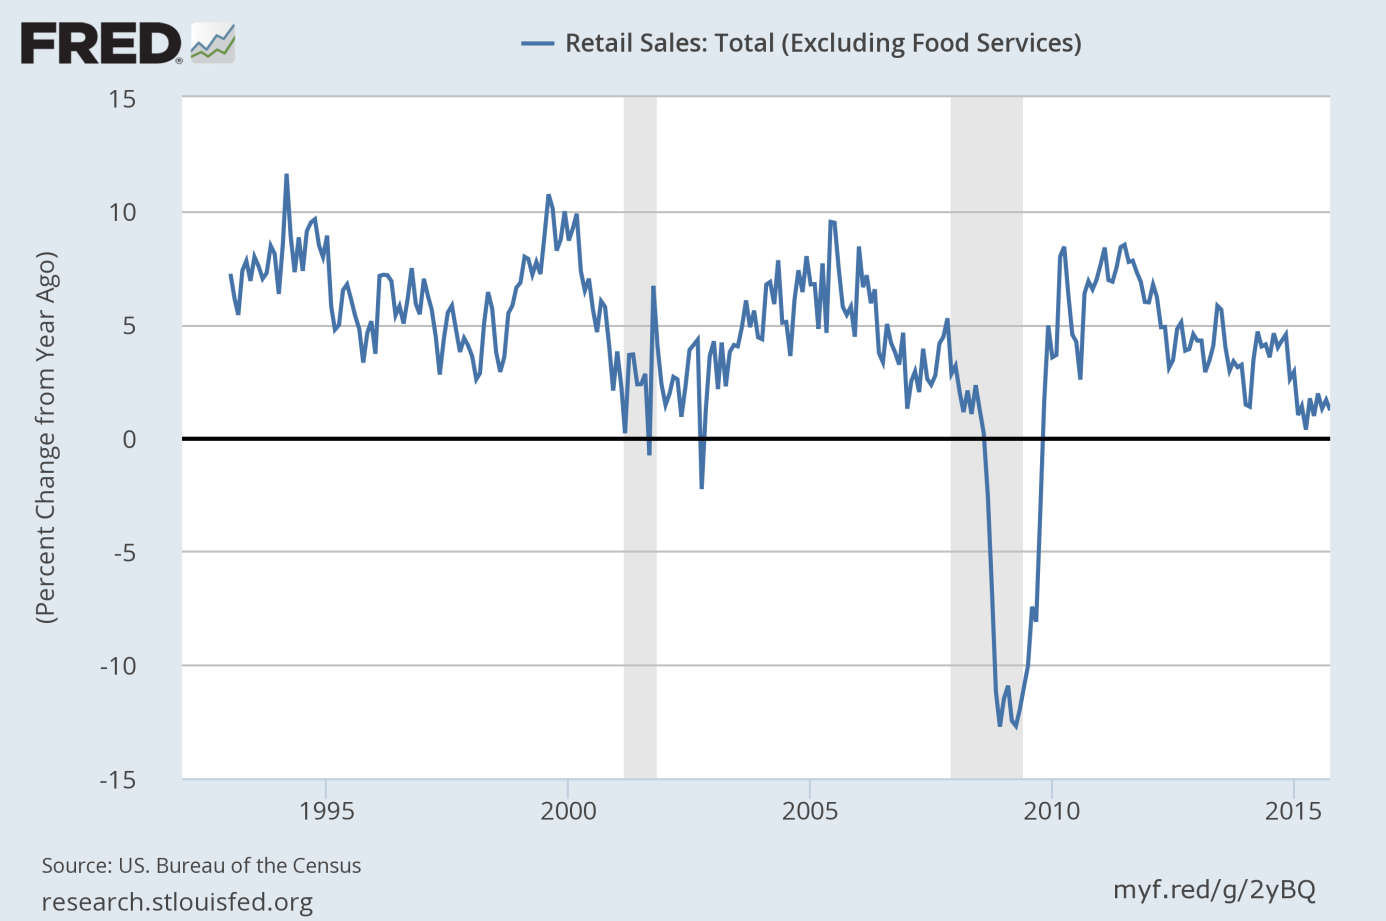 U.S. Retail Sales (excluding food services, as a percent change from year ago) from 1993 to 2015.